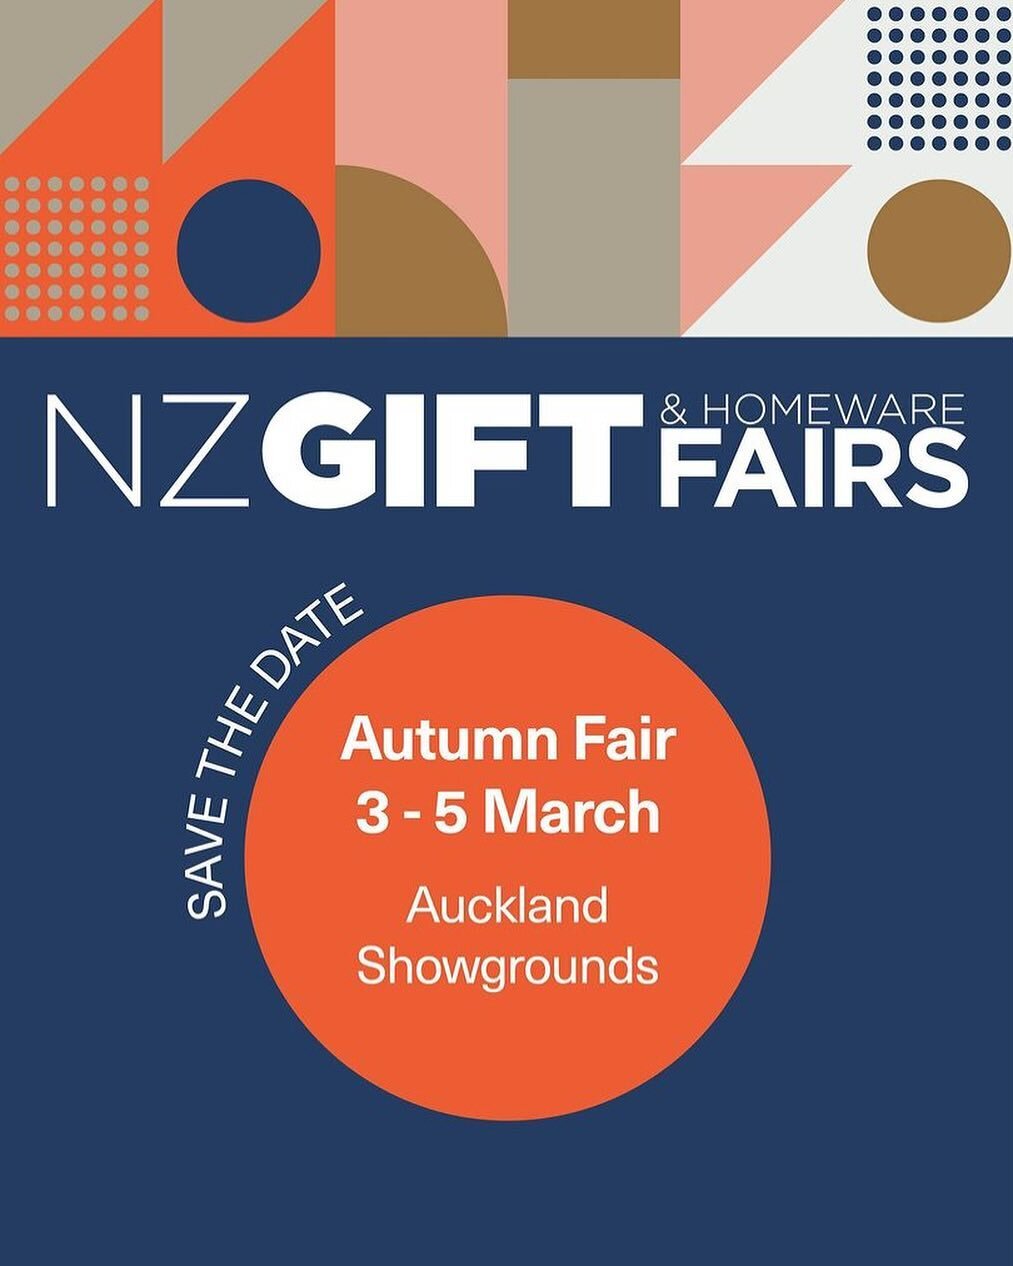 We are excited to be attending the Autumn Gift Fair in Auckland 3-5th March with our amazing Maine Beach home fragrance and bodycare gift range. We can&rsquo;t wait to meet you all ❤️ @nzgiftfairs